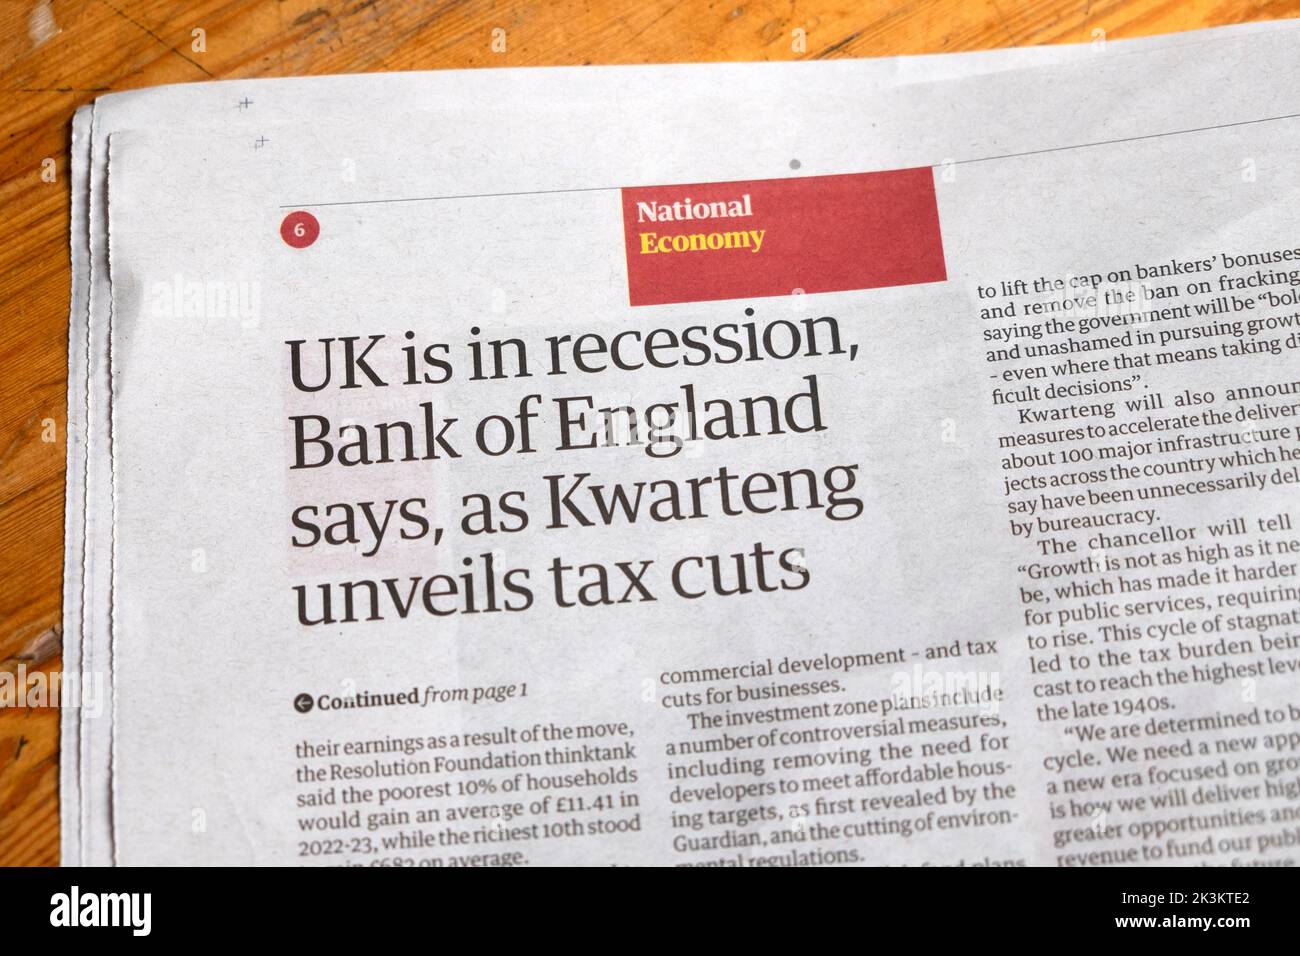 'UK is in recession, Bank of England says, as Kwarteng unveils tax cuts' Guardian newspaper headline British economy article 23 September 2022  London Stock Photo